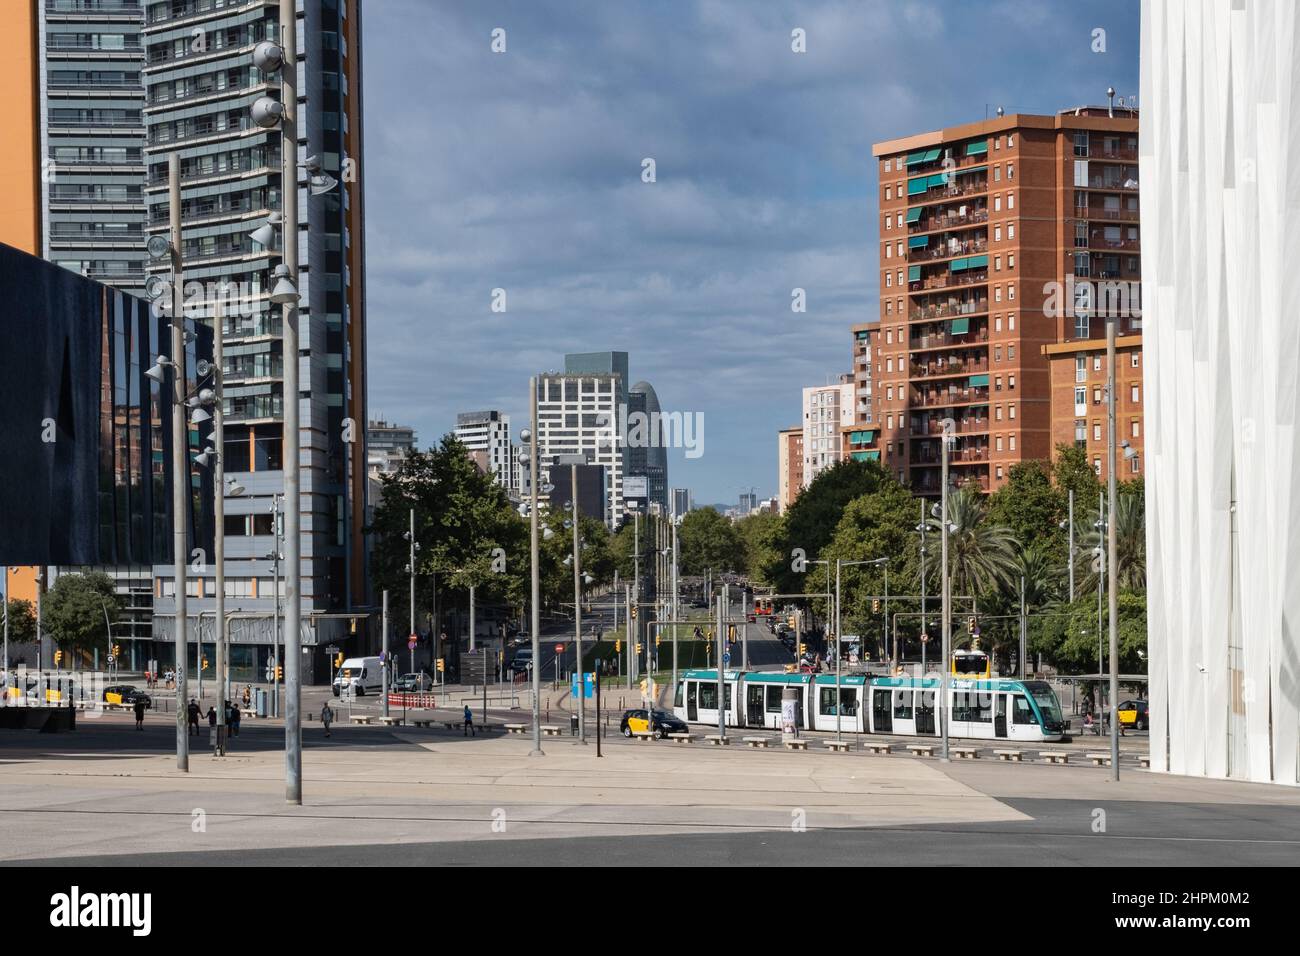 View of the Av Diagonal in Barcelona, Spain. Tram and taxis move along the road during the daytime, Skyscrapers against blue sky in the background. Stock Photo